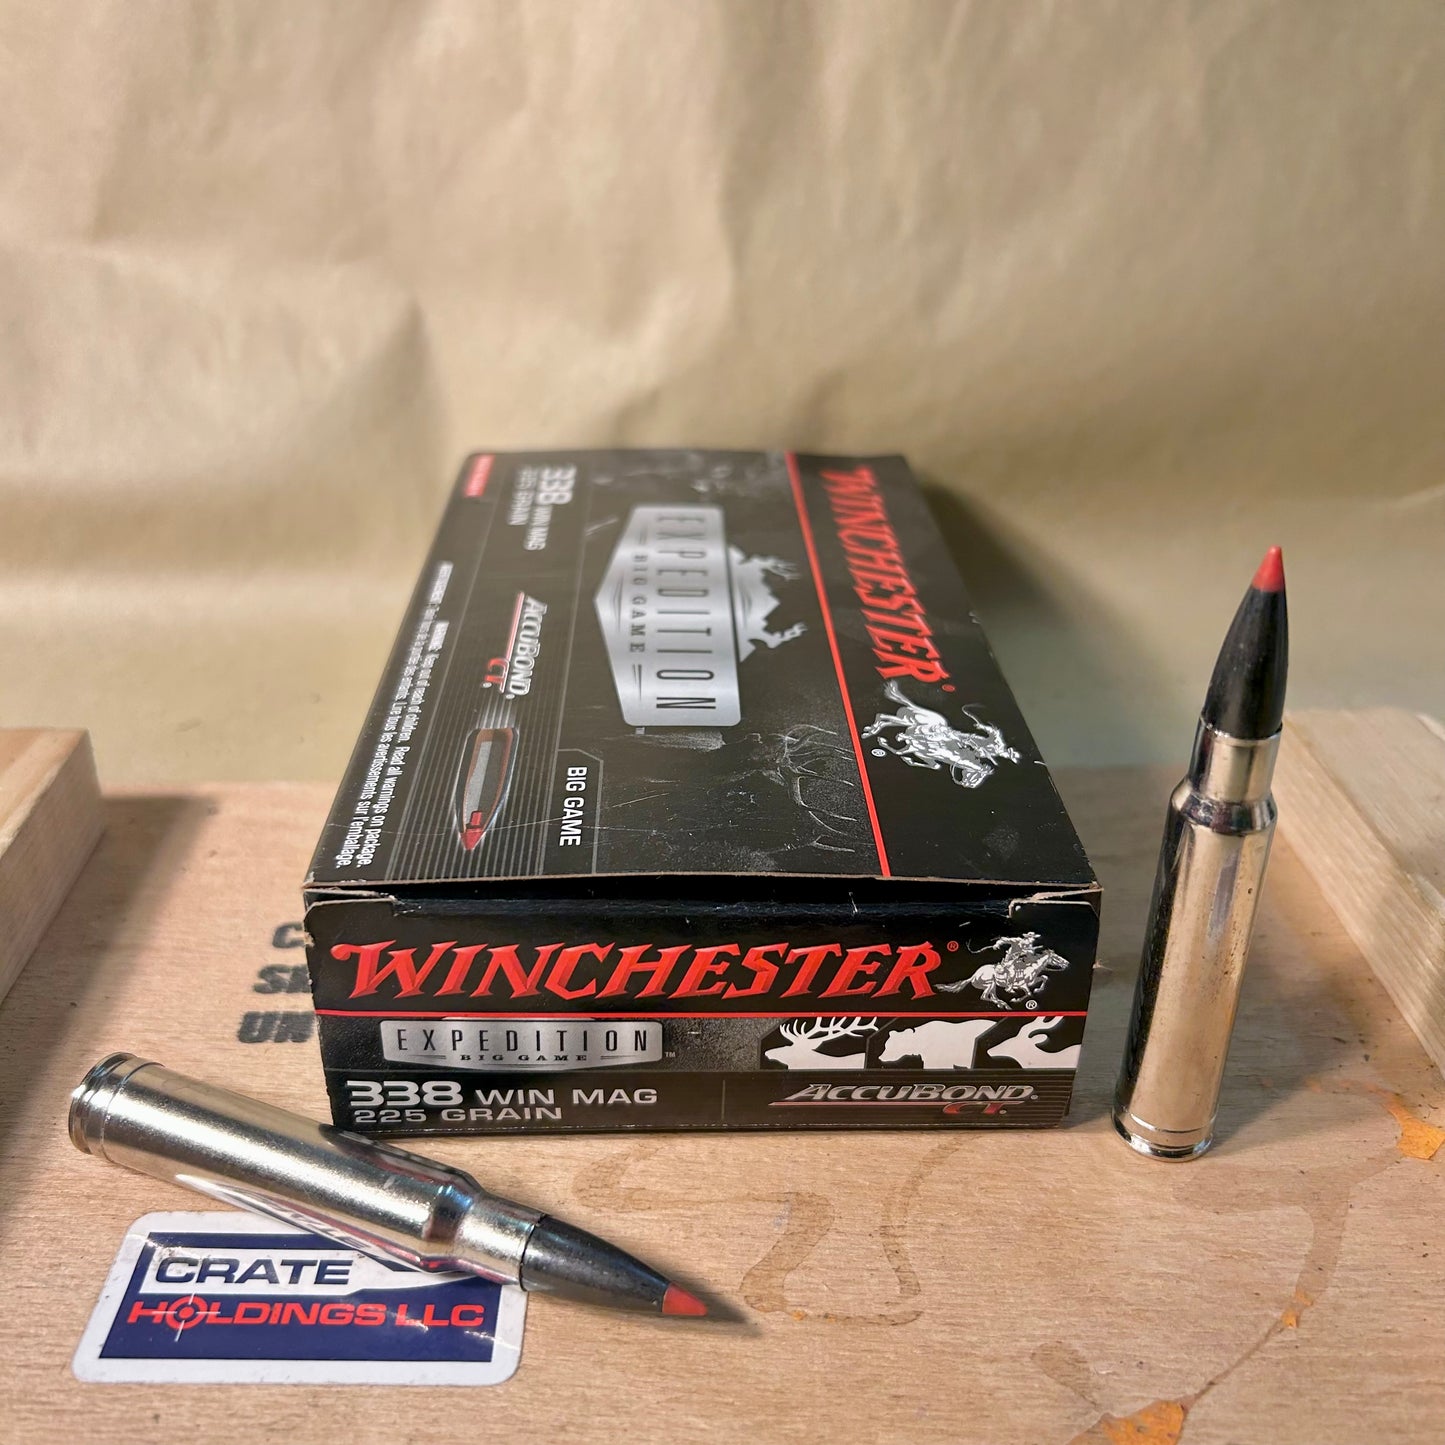 20 Round Box Winchester Expedition .338 Win. Mag Ammo 225gr Accubond CT - S338CT